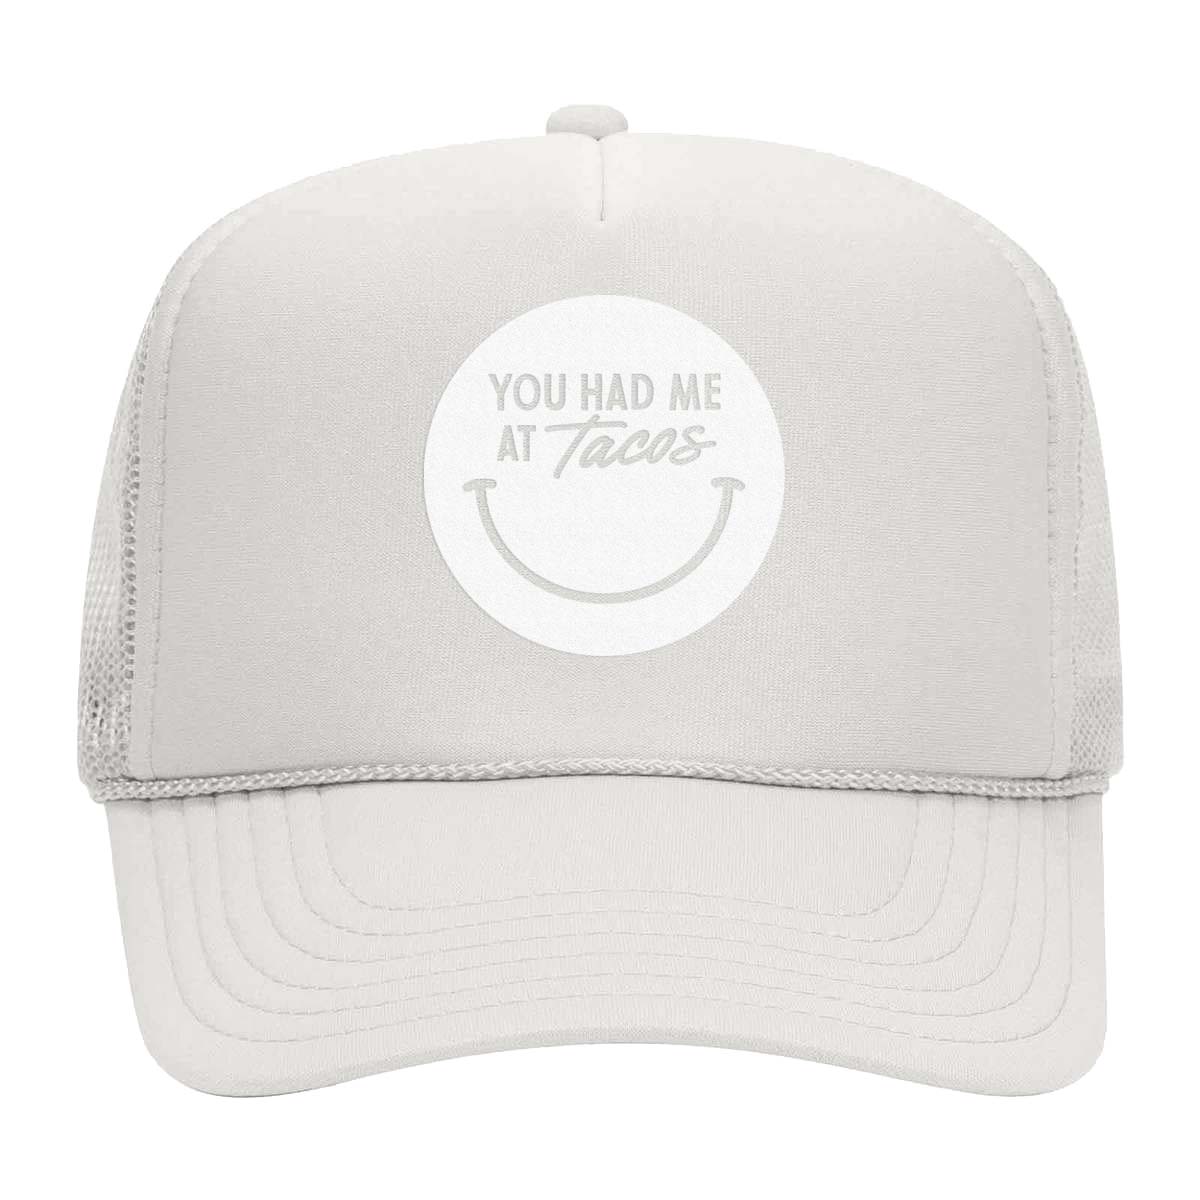 You Had Me at Tacos Smile Foam Snapback